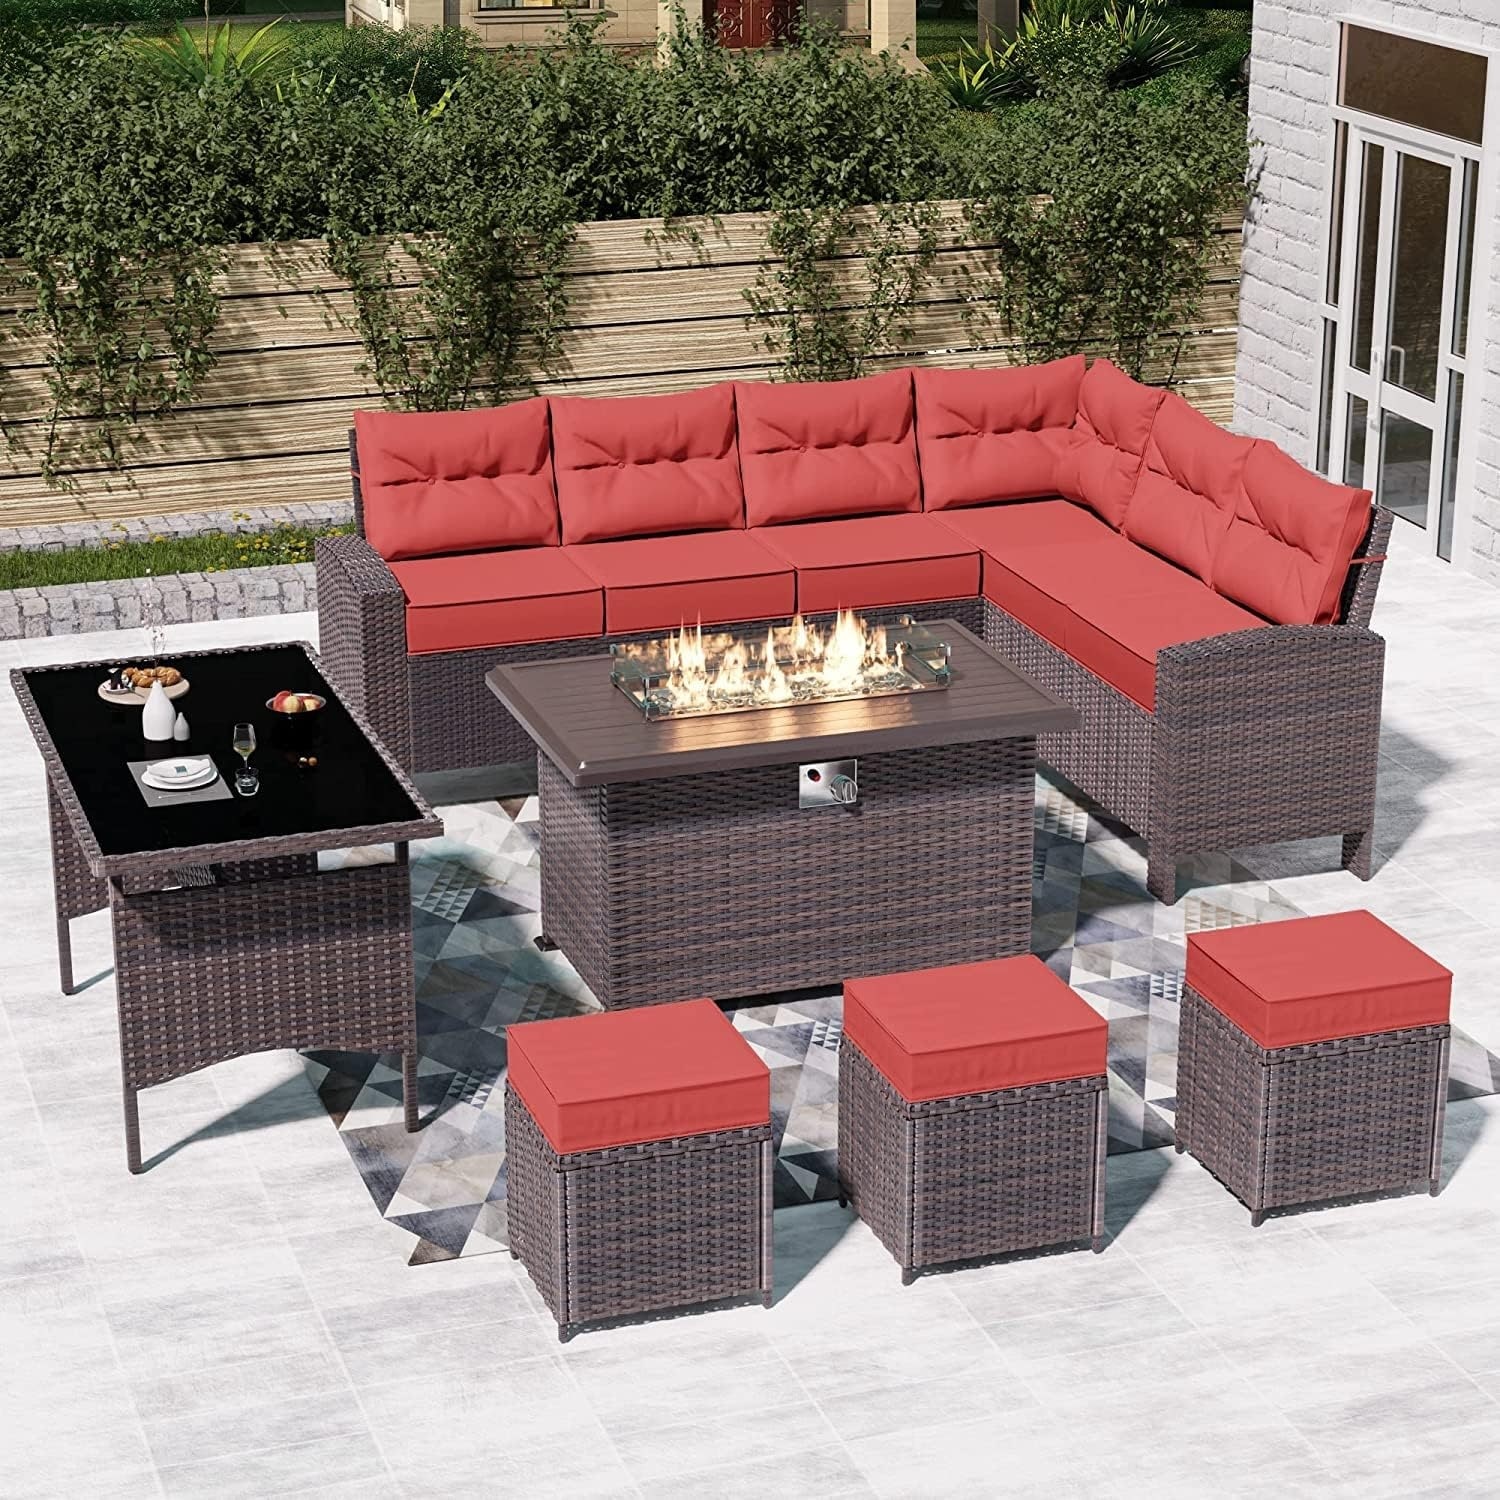 Kullavik 7 Piece Rattan Outdoor Sectional Conversation Patio Furniture Set, Wicker Sofa Dining Table with Chair, FirePit Table